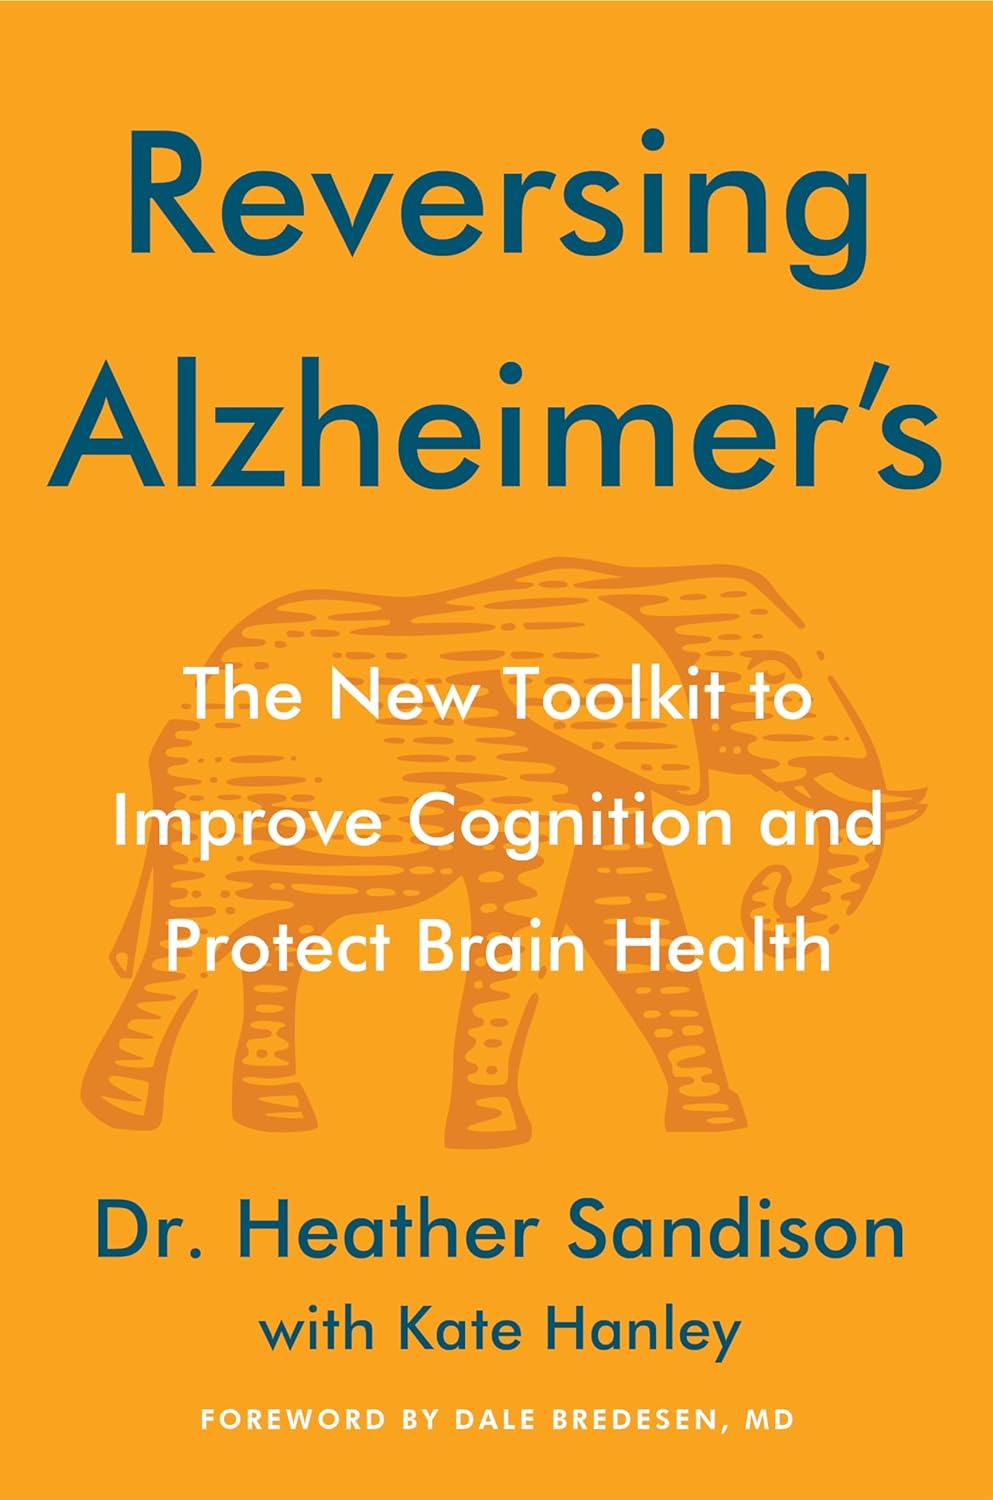 Reversing Alzheimer’s by Heather Sandison with Kate Hanley